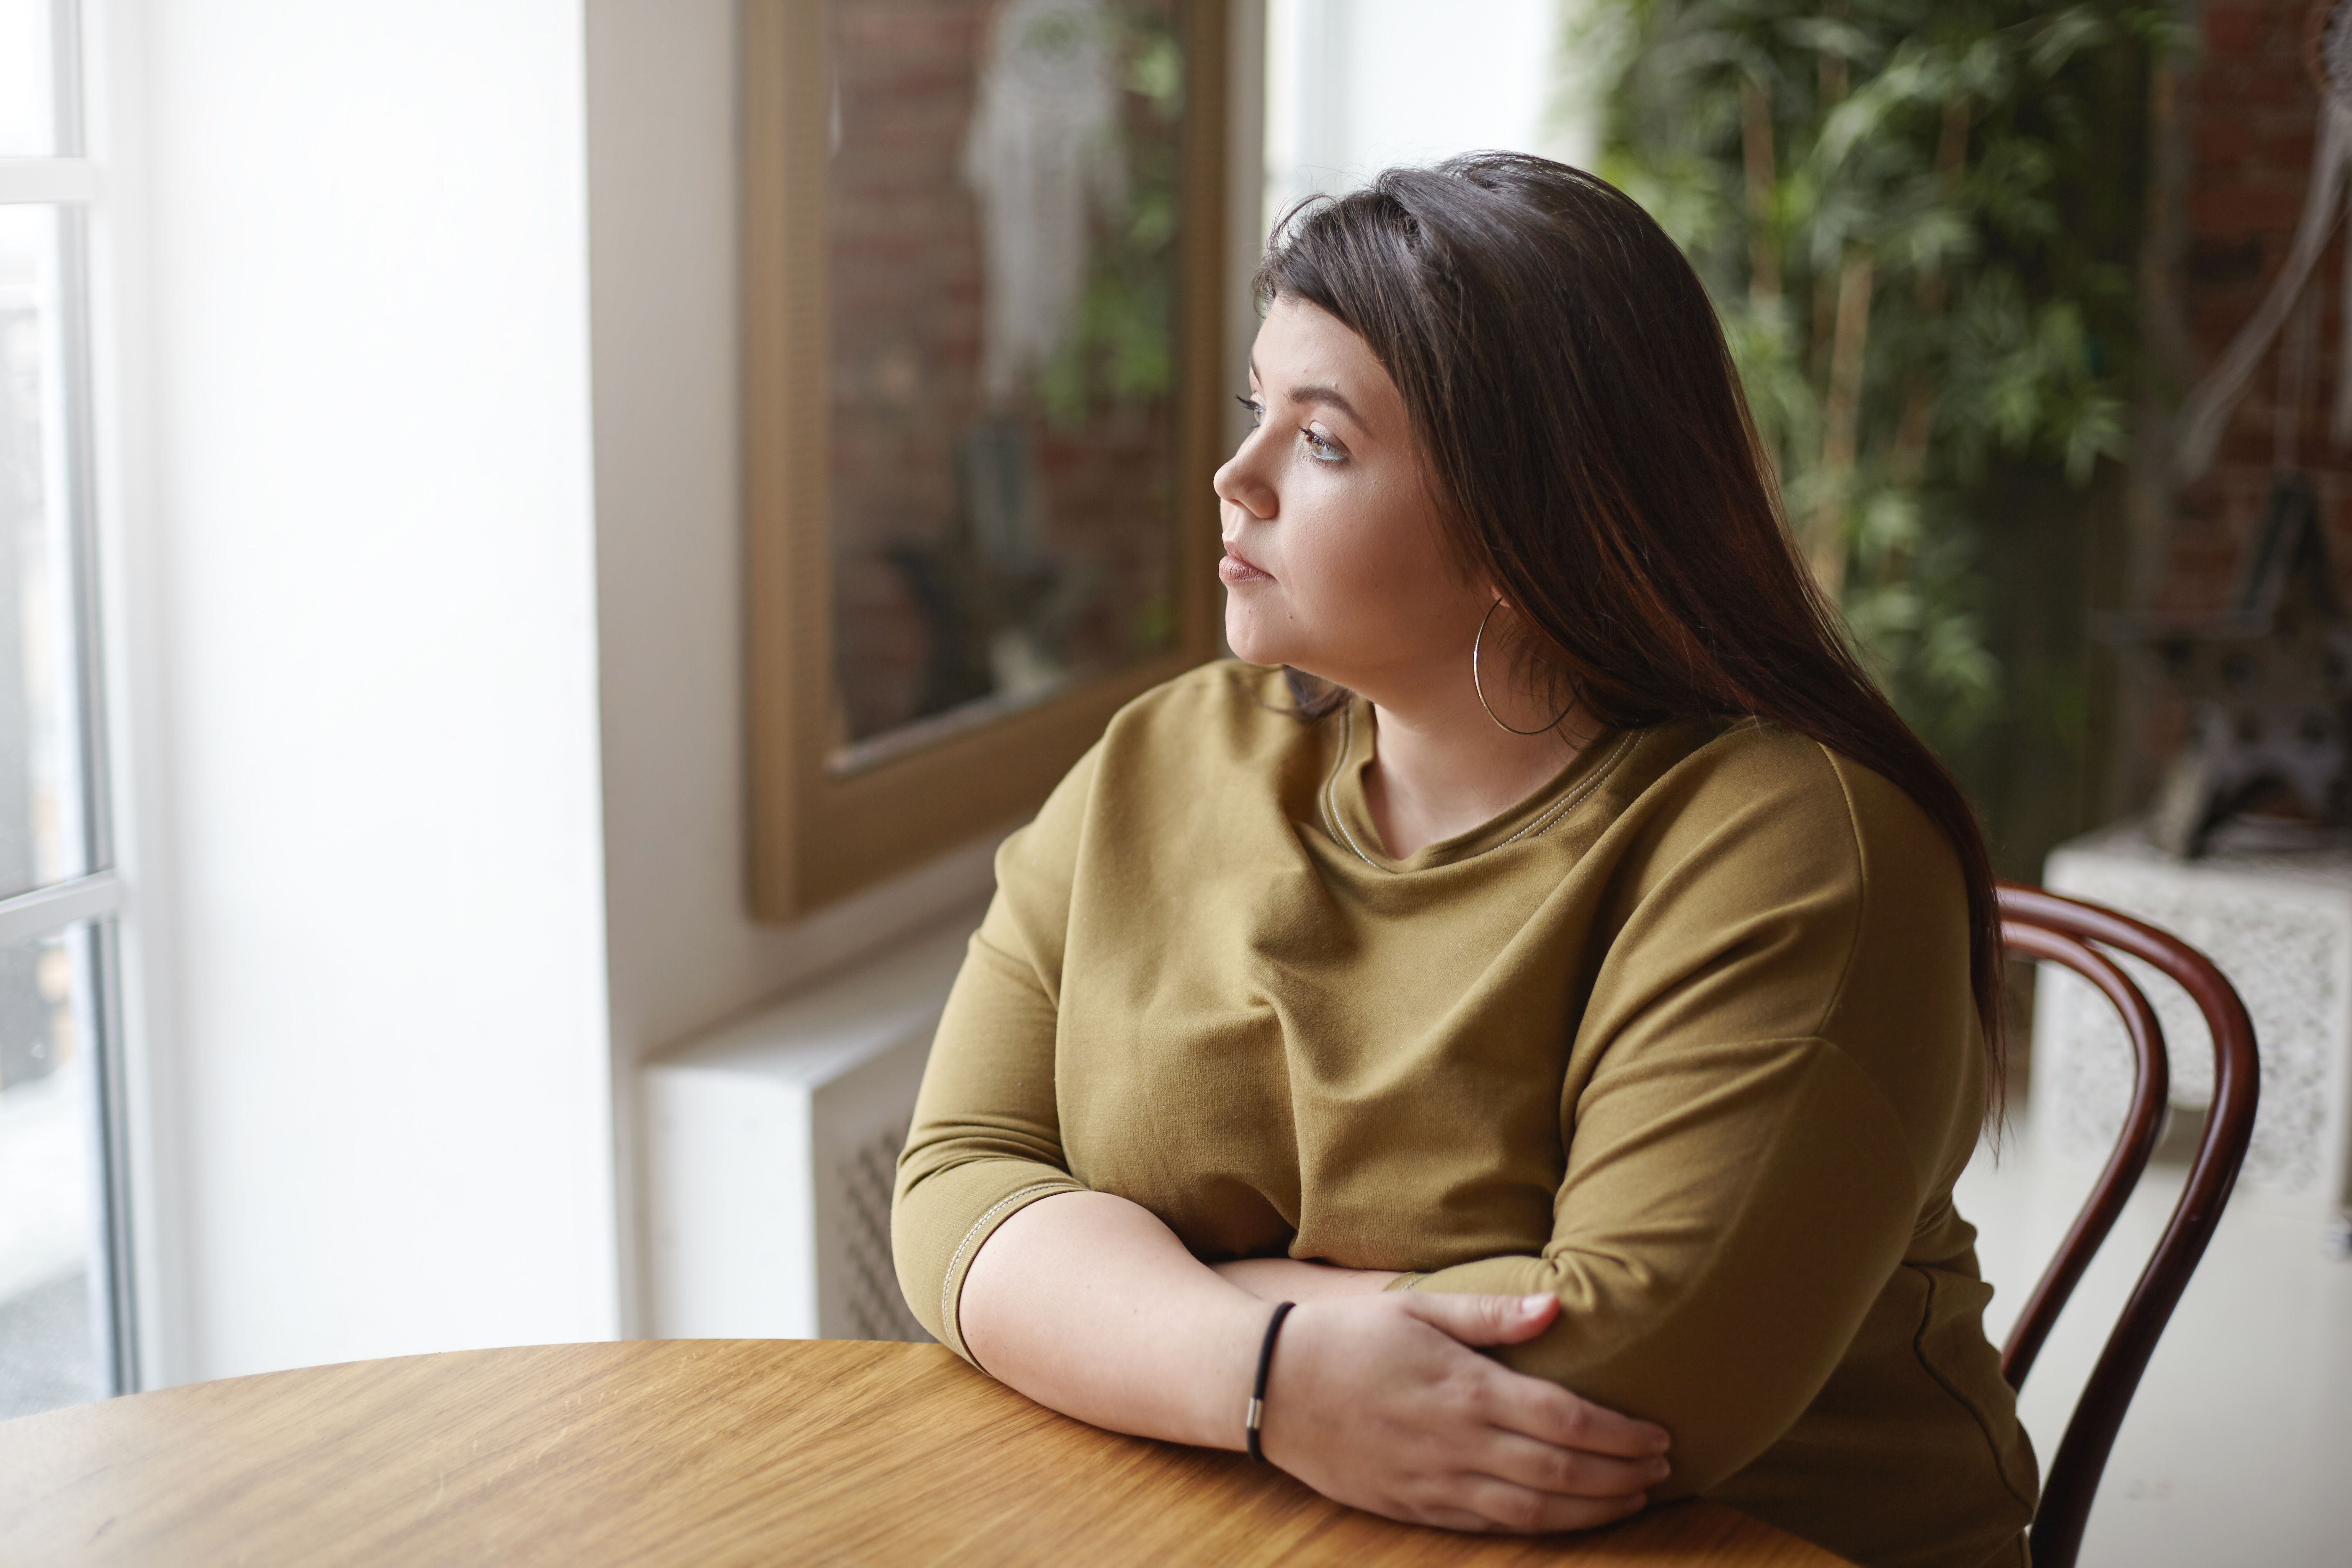 Overweight woman looks out window